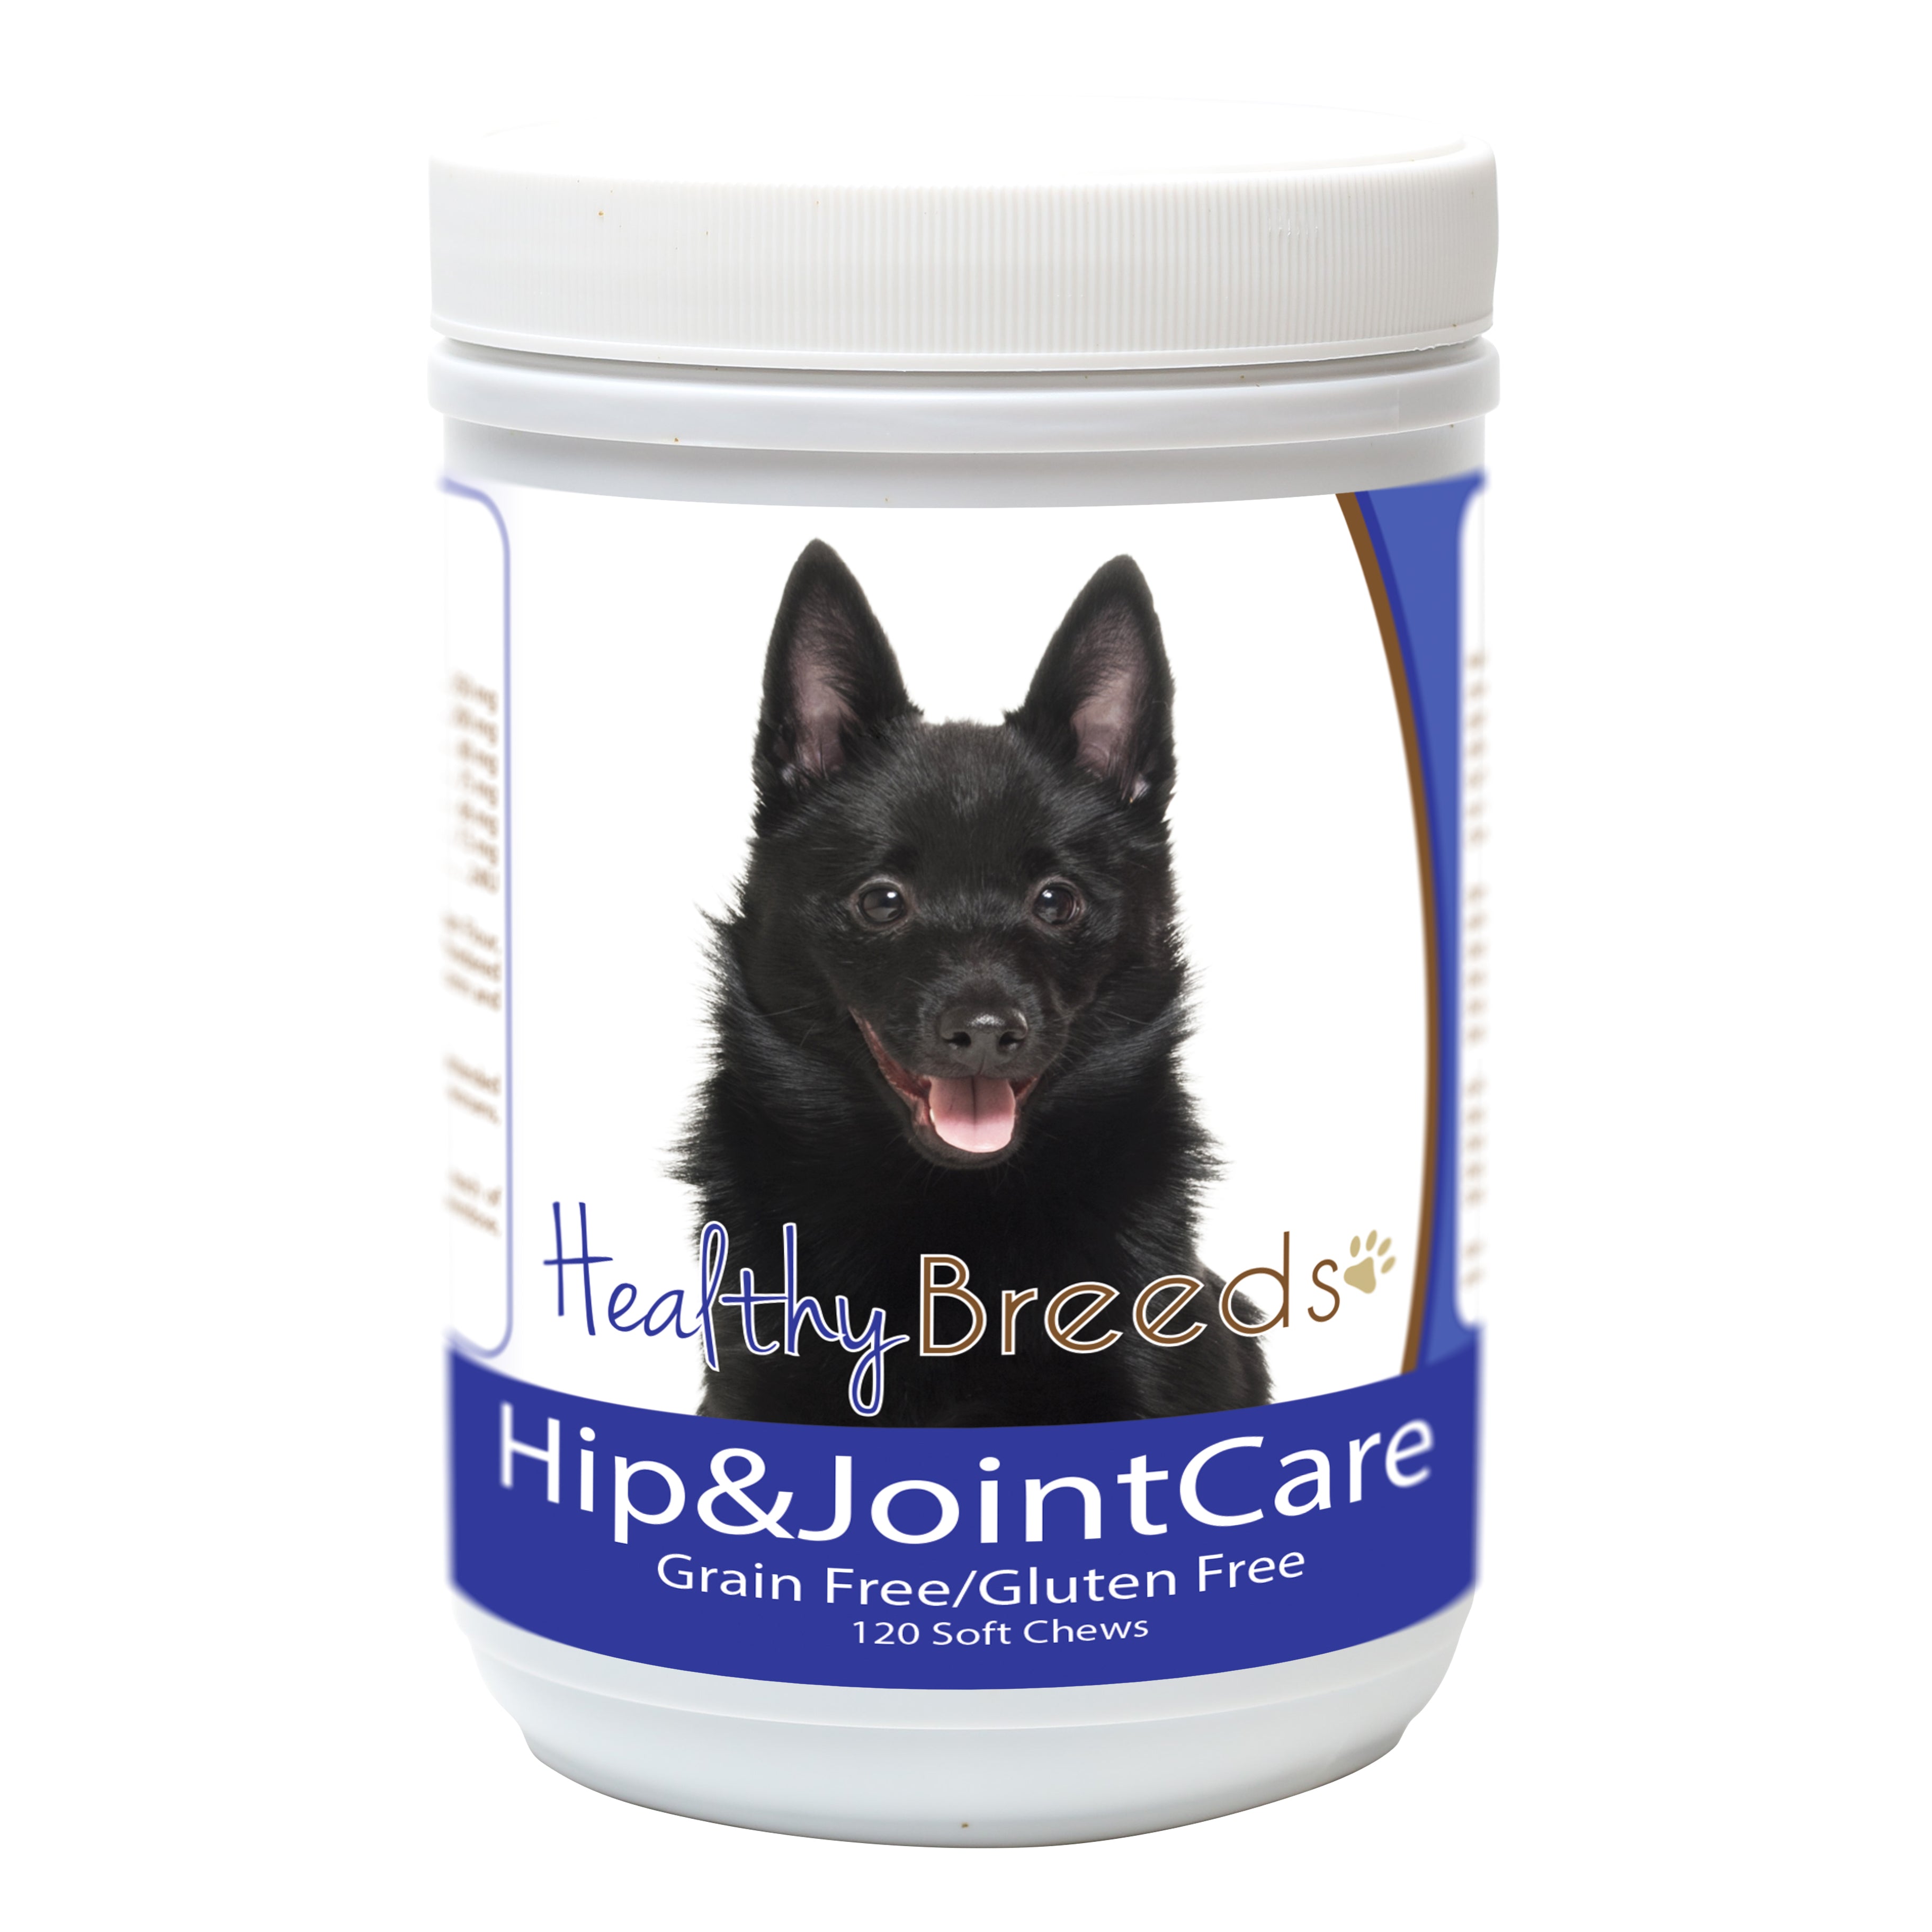 Schipperke Hip and Joint Care 120 Count